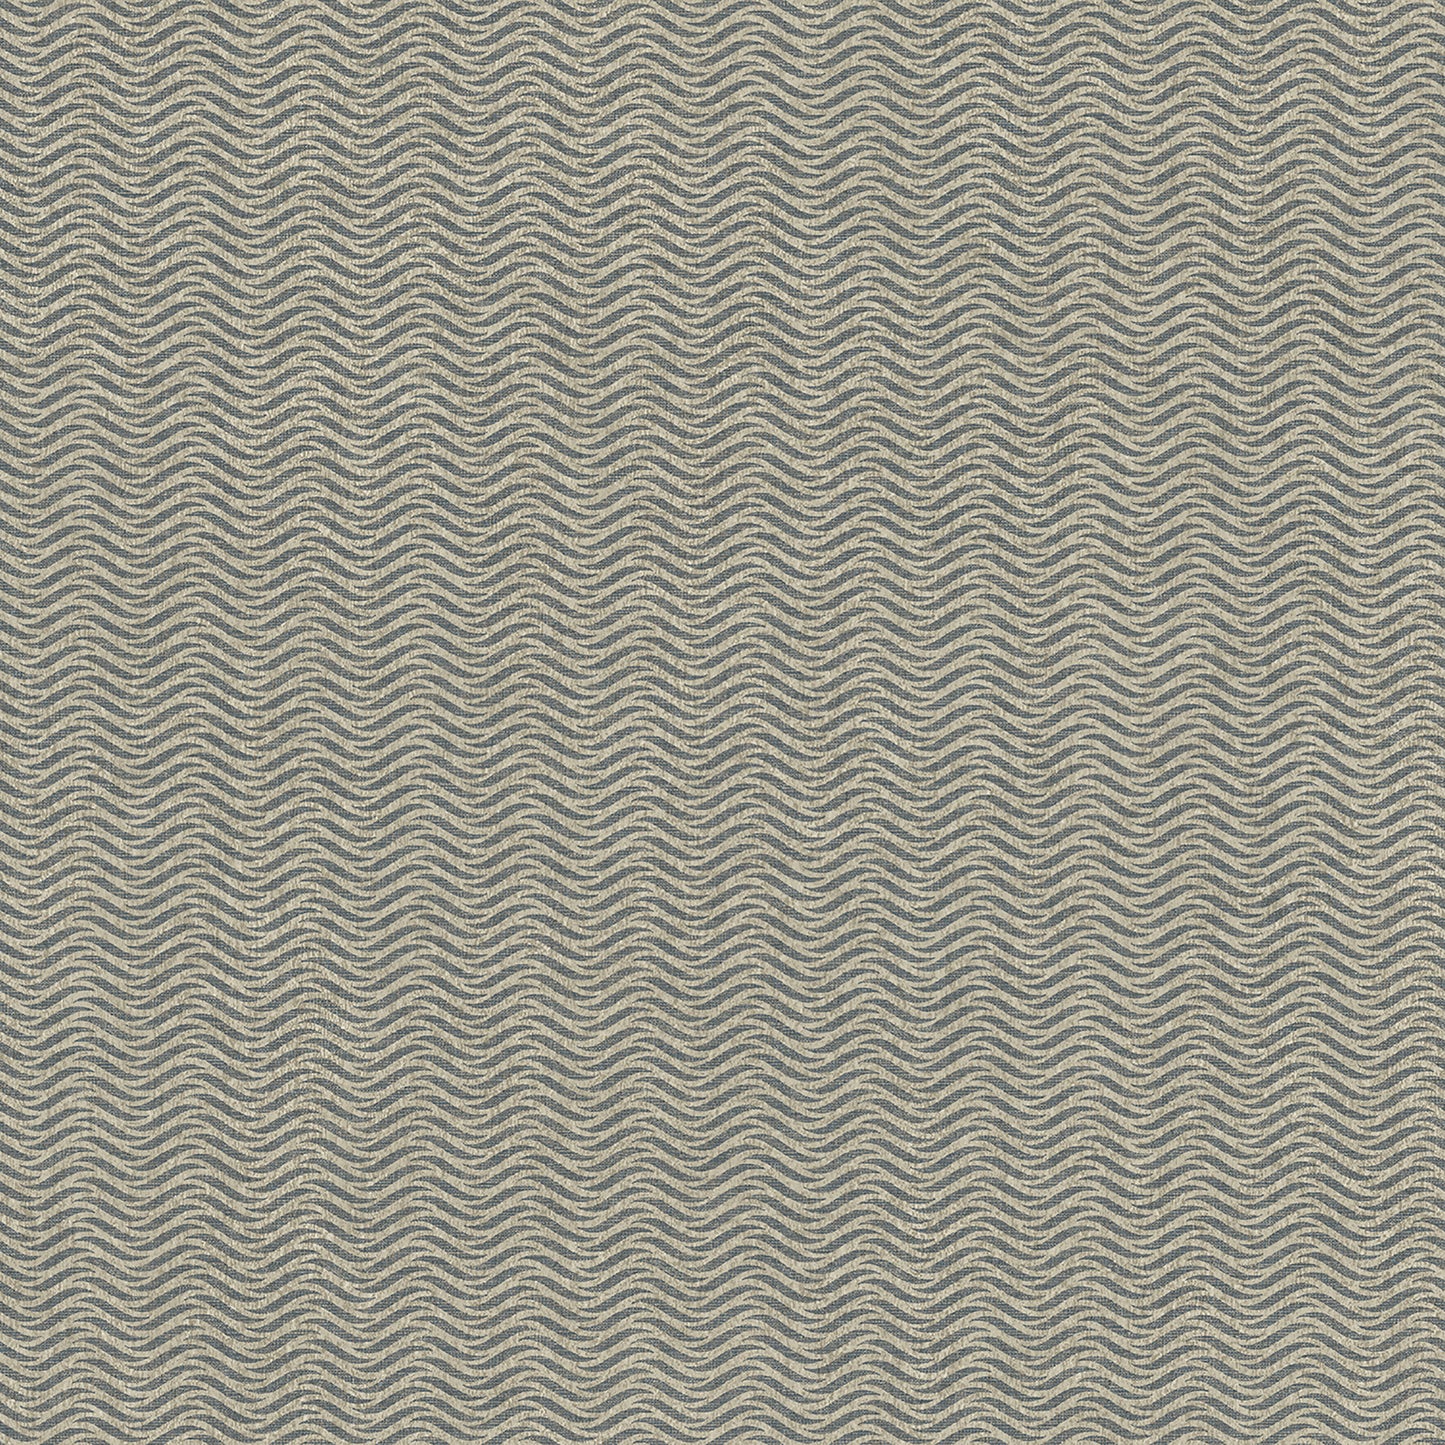 Save 4020-75919 Geo & Textures Jude Coffee Woven Waves Coffee by Advantage